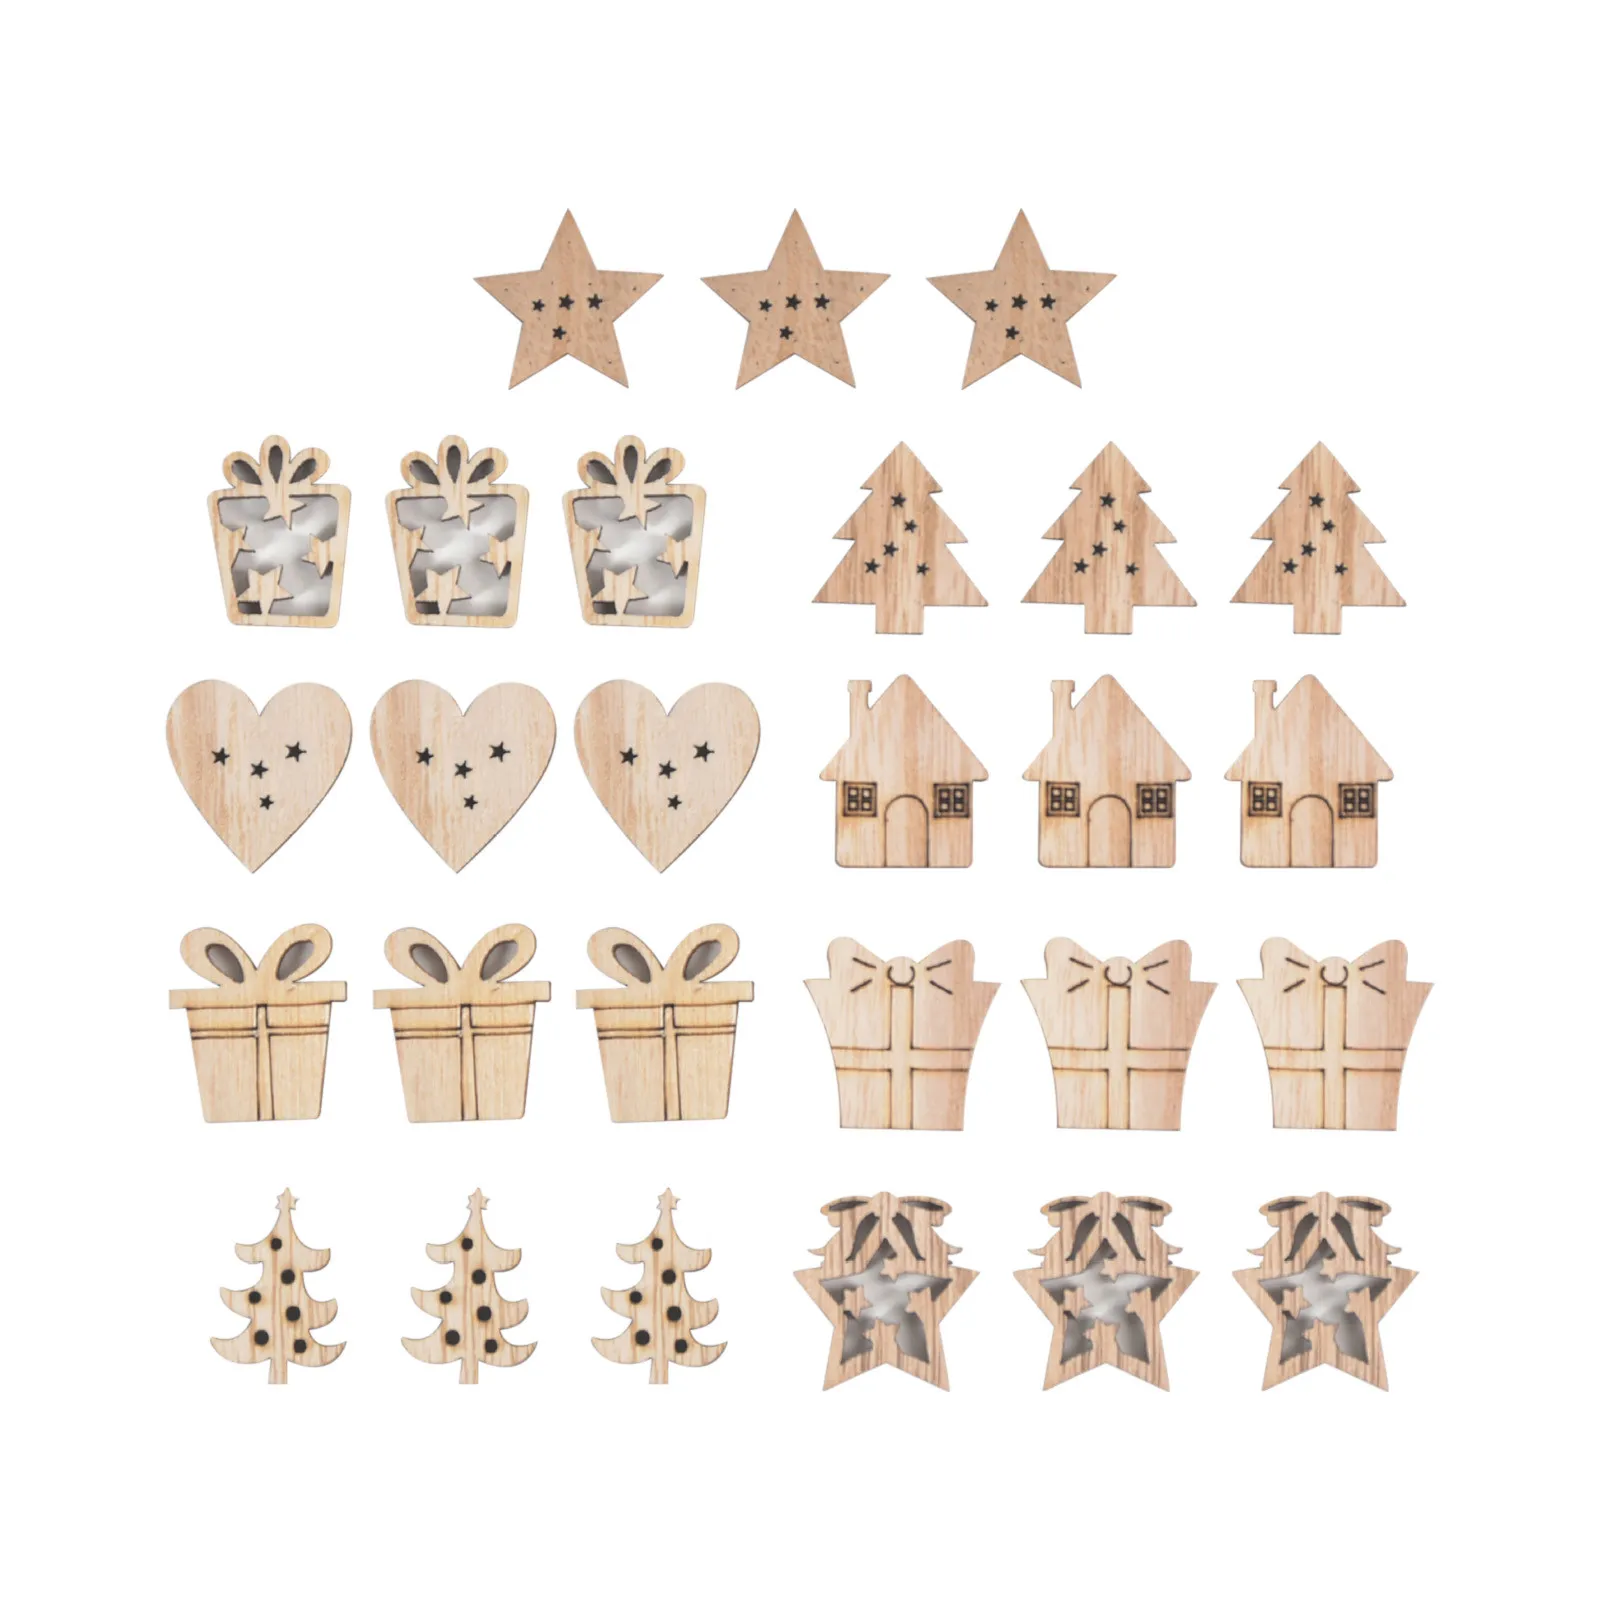 48pc Natural Wooden Rustic Christmas Tree Hanging Decorations